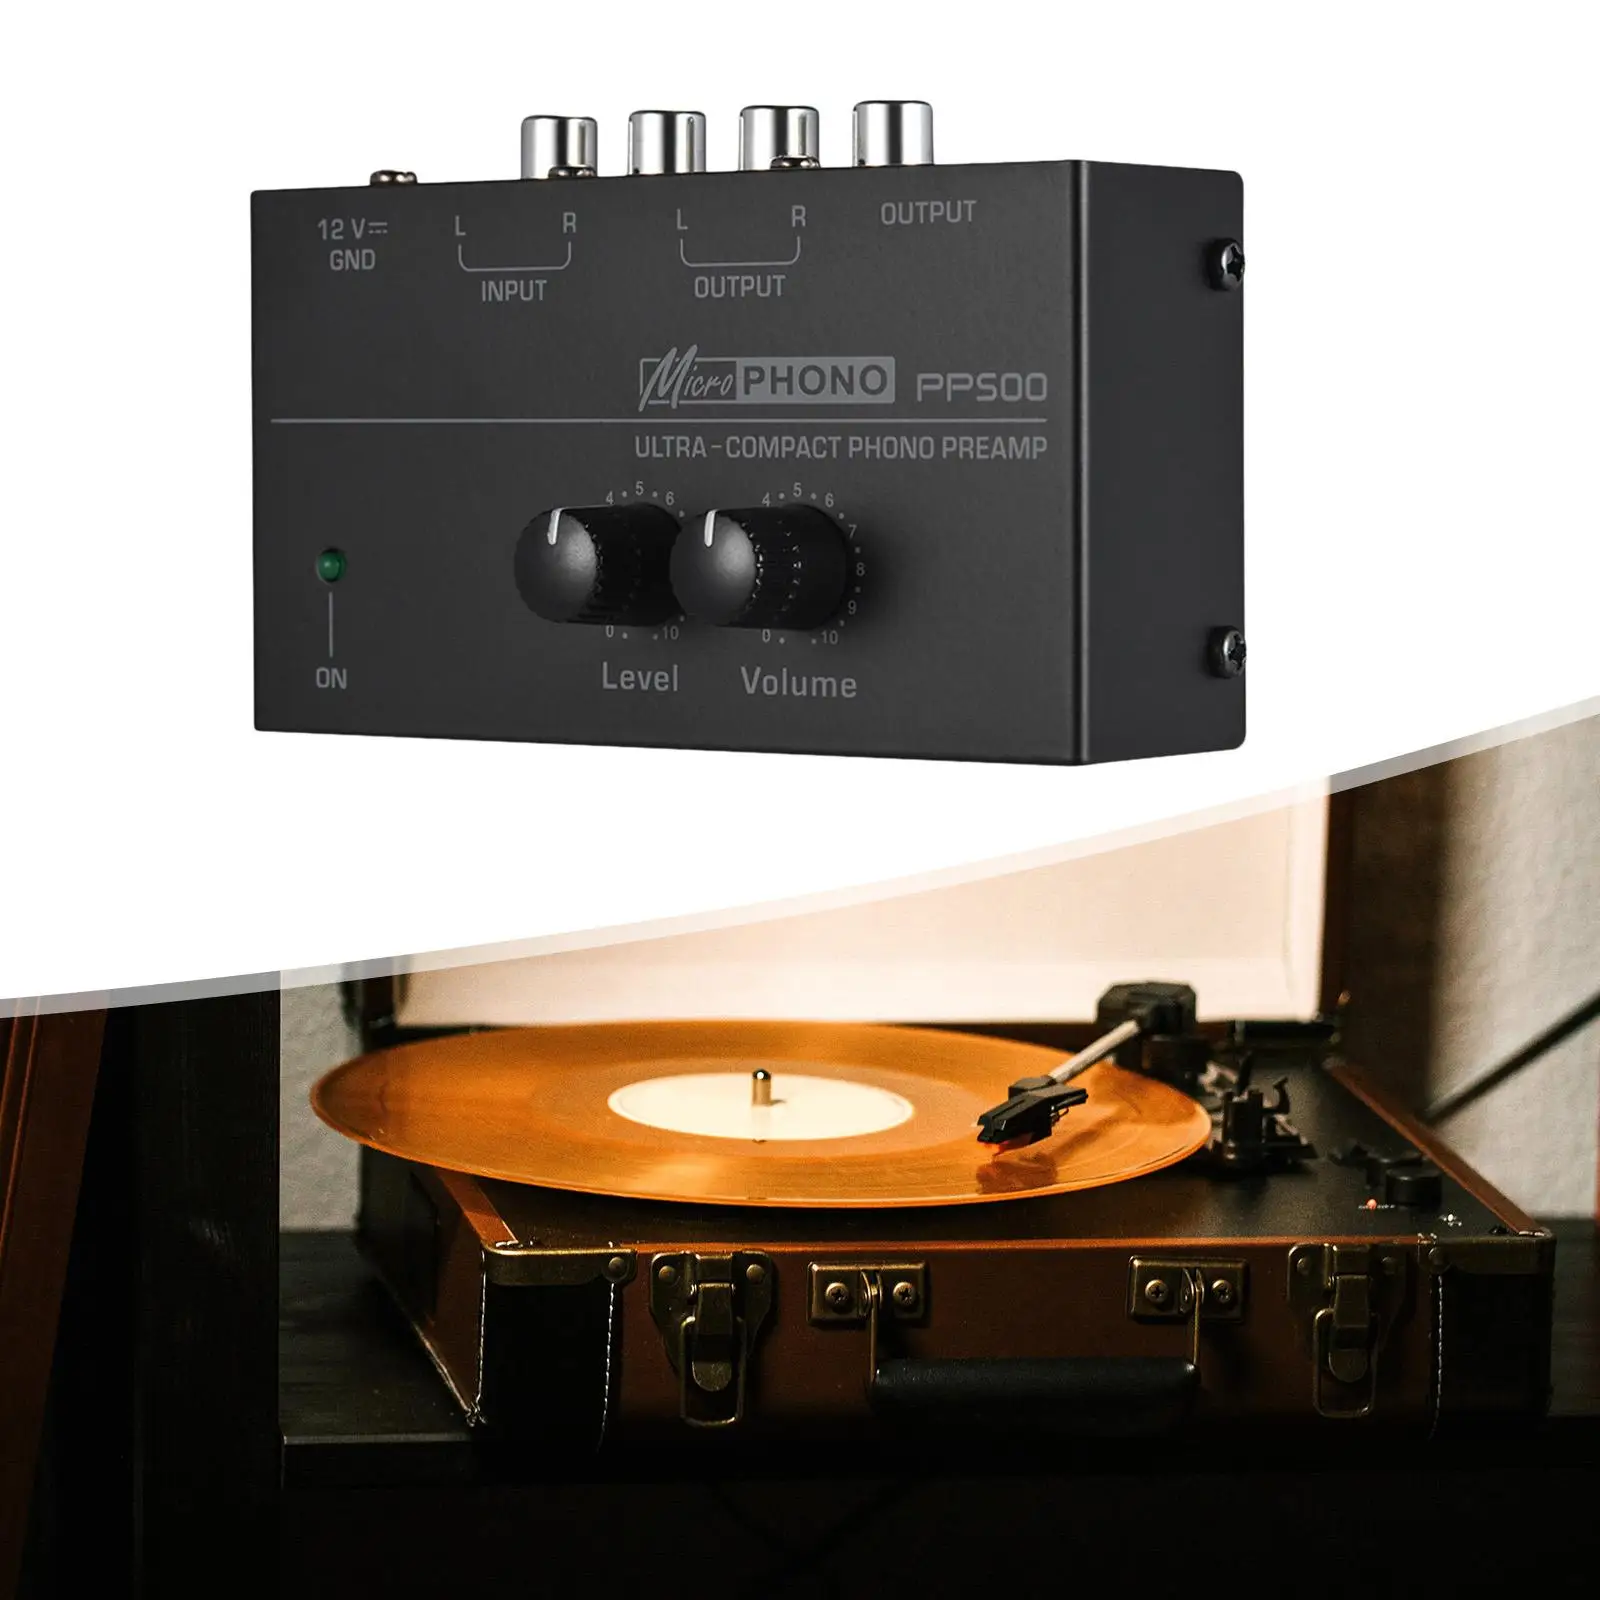 PP500 Phono Turntable Preamp Independent Knob Control with Level Volume Control Amplifier